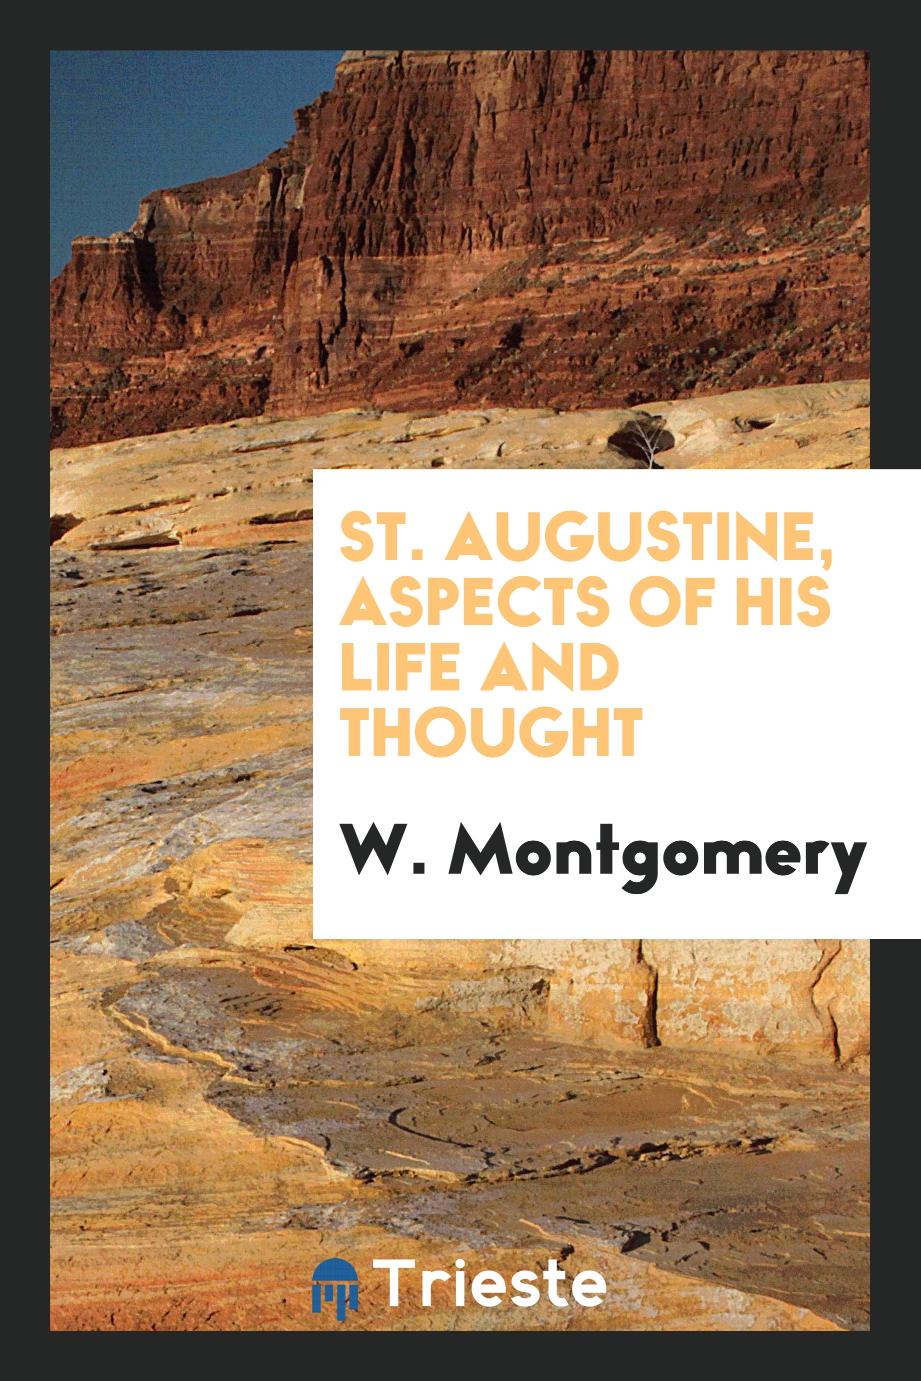 St. Augustine, aspects of his life and thought